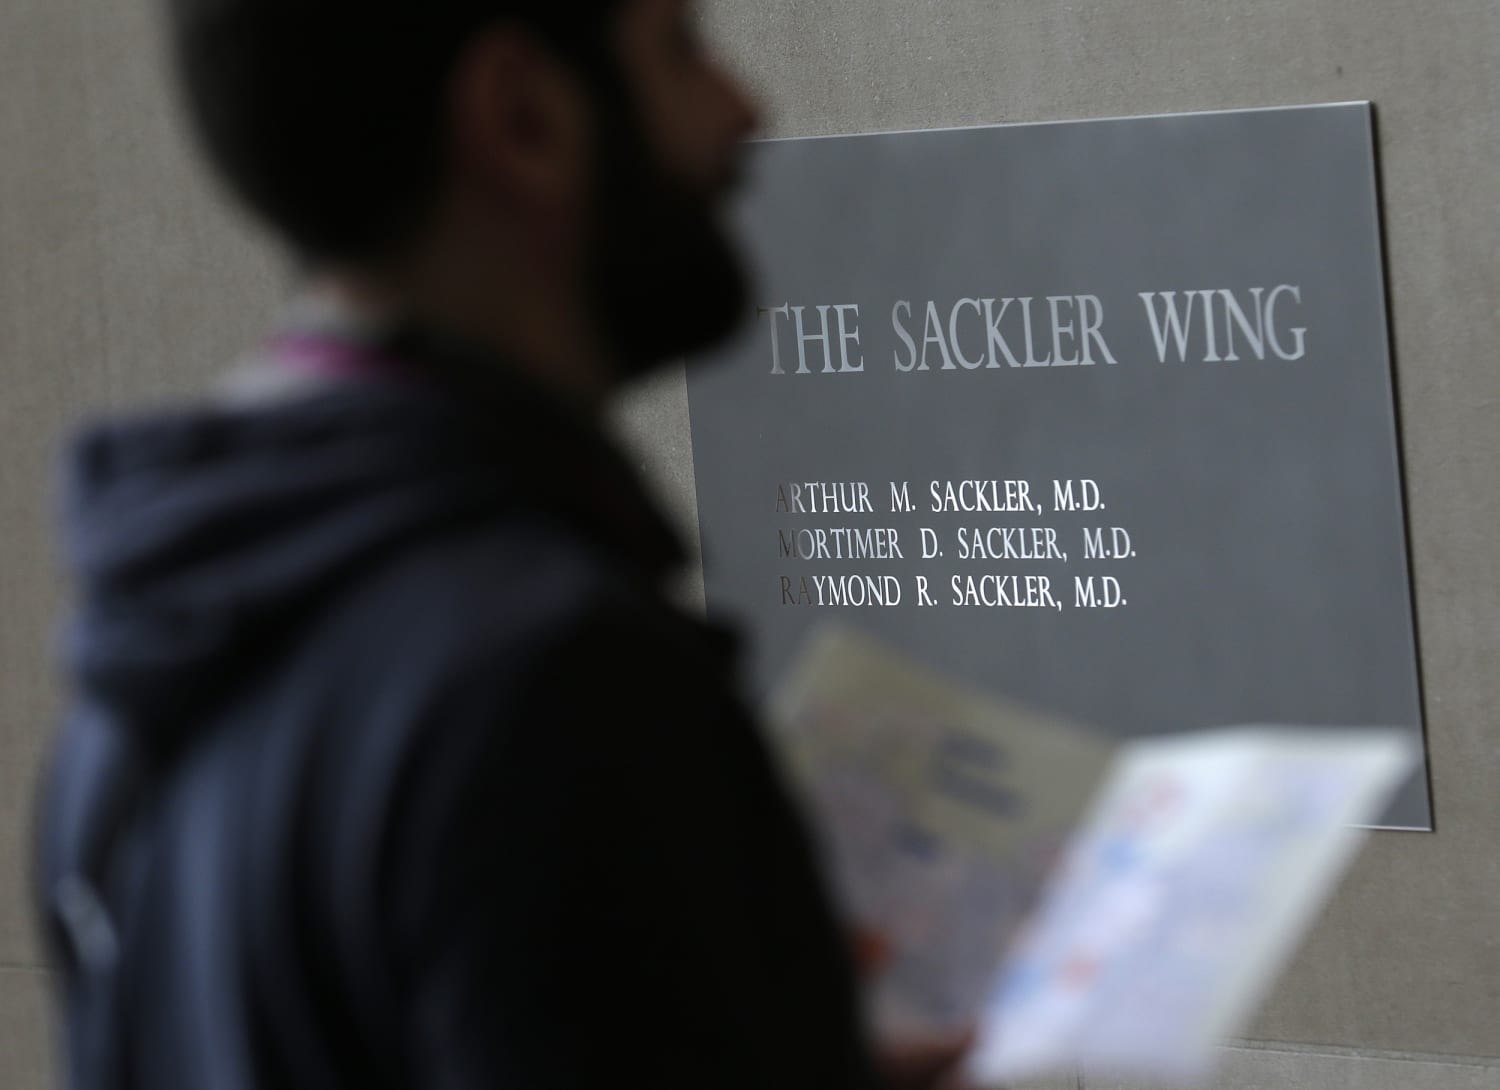 NYC’s Metropolitan Museum of Art removes name of Sacklers, family linked to opioid crisis